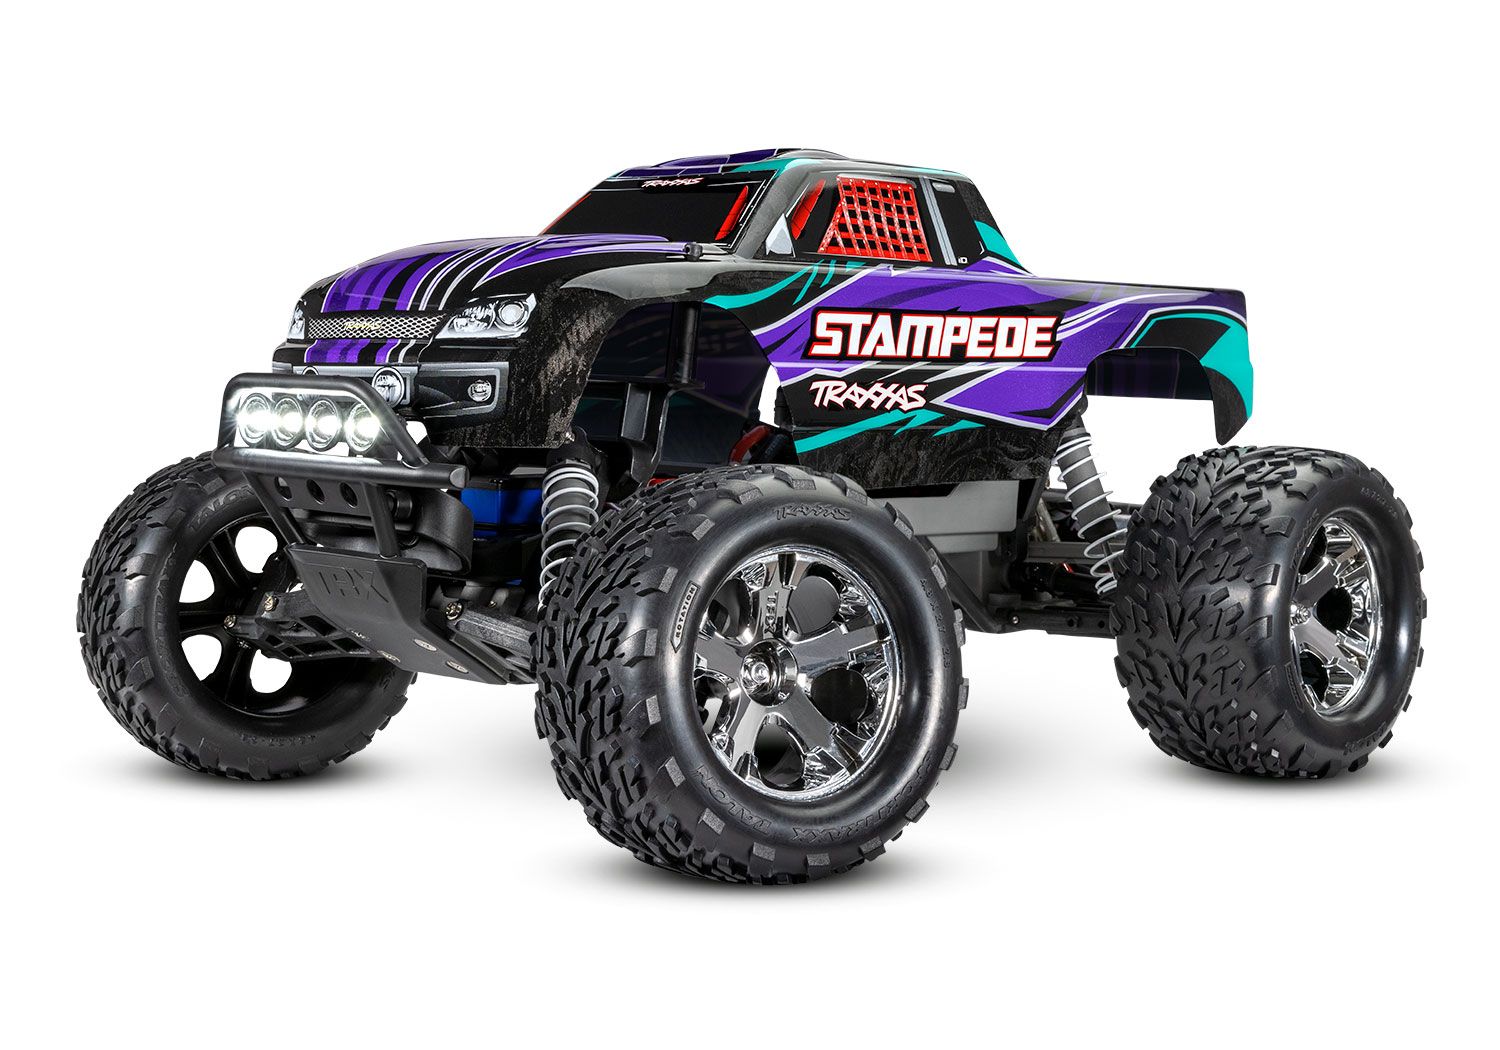 TRAXXAS 36054-61 Stampede 1/10 monster truck RTR, with TQ 2.4GHz radio, XL-5® ESC, 8.4V NiMH 3000 mAh Power Cell™ battery, 4-amp DC Fast Charger, LED lighting, and ProGraphix® painted body.